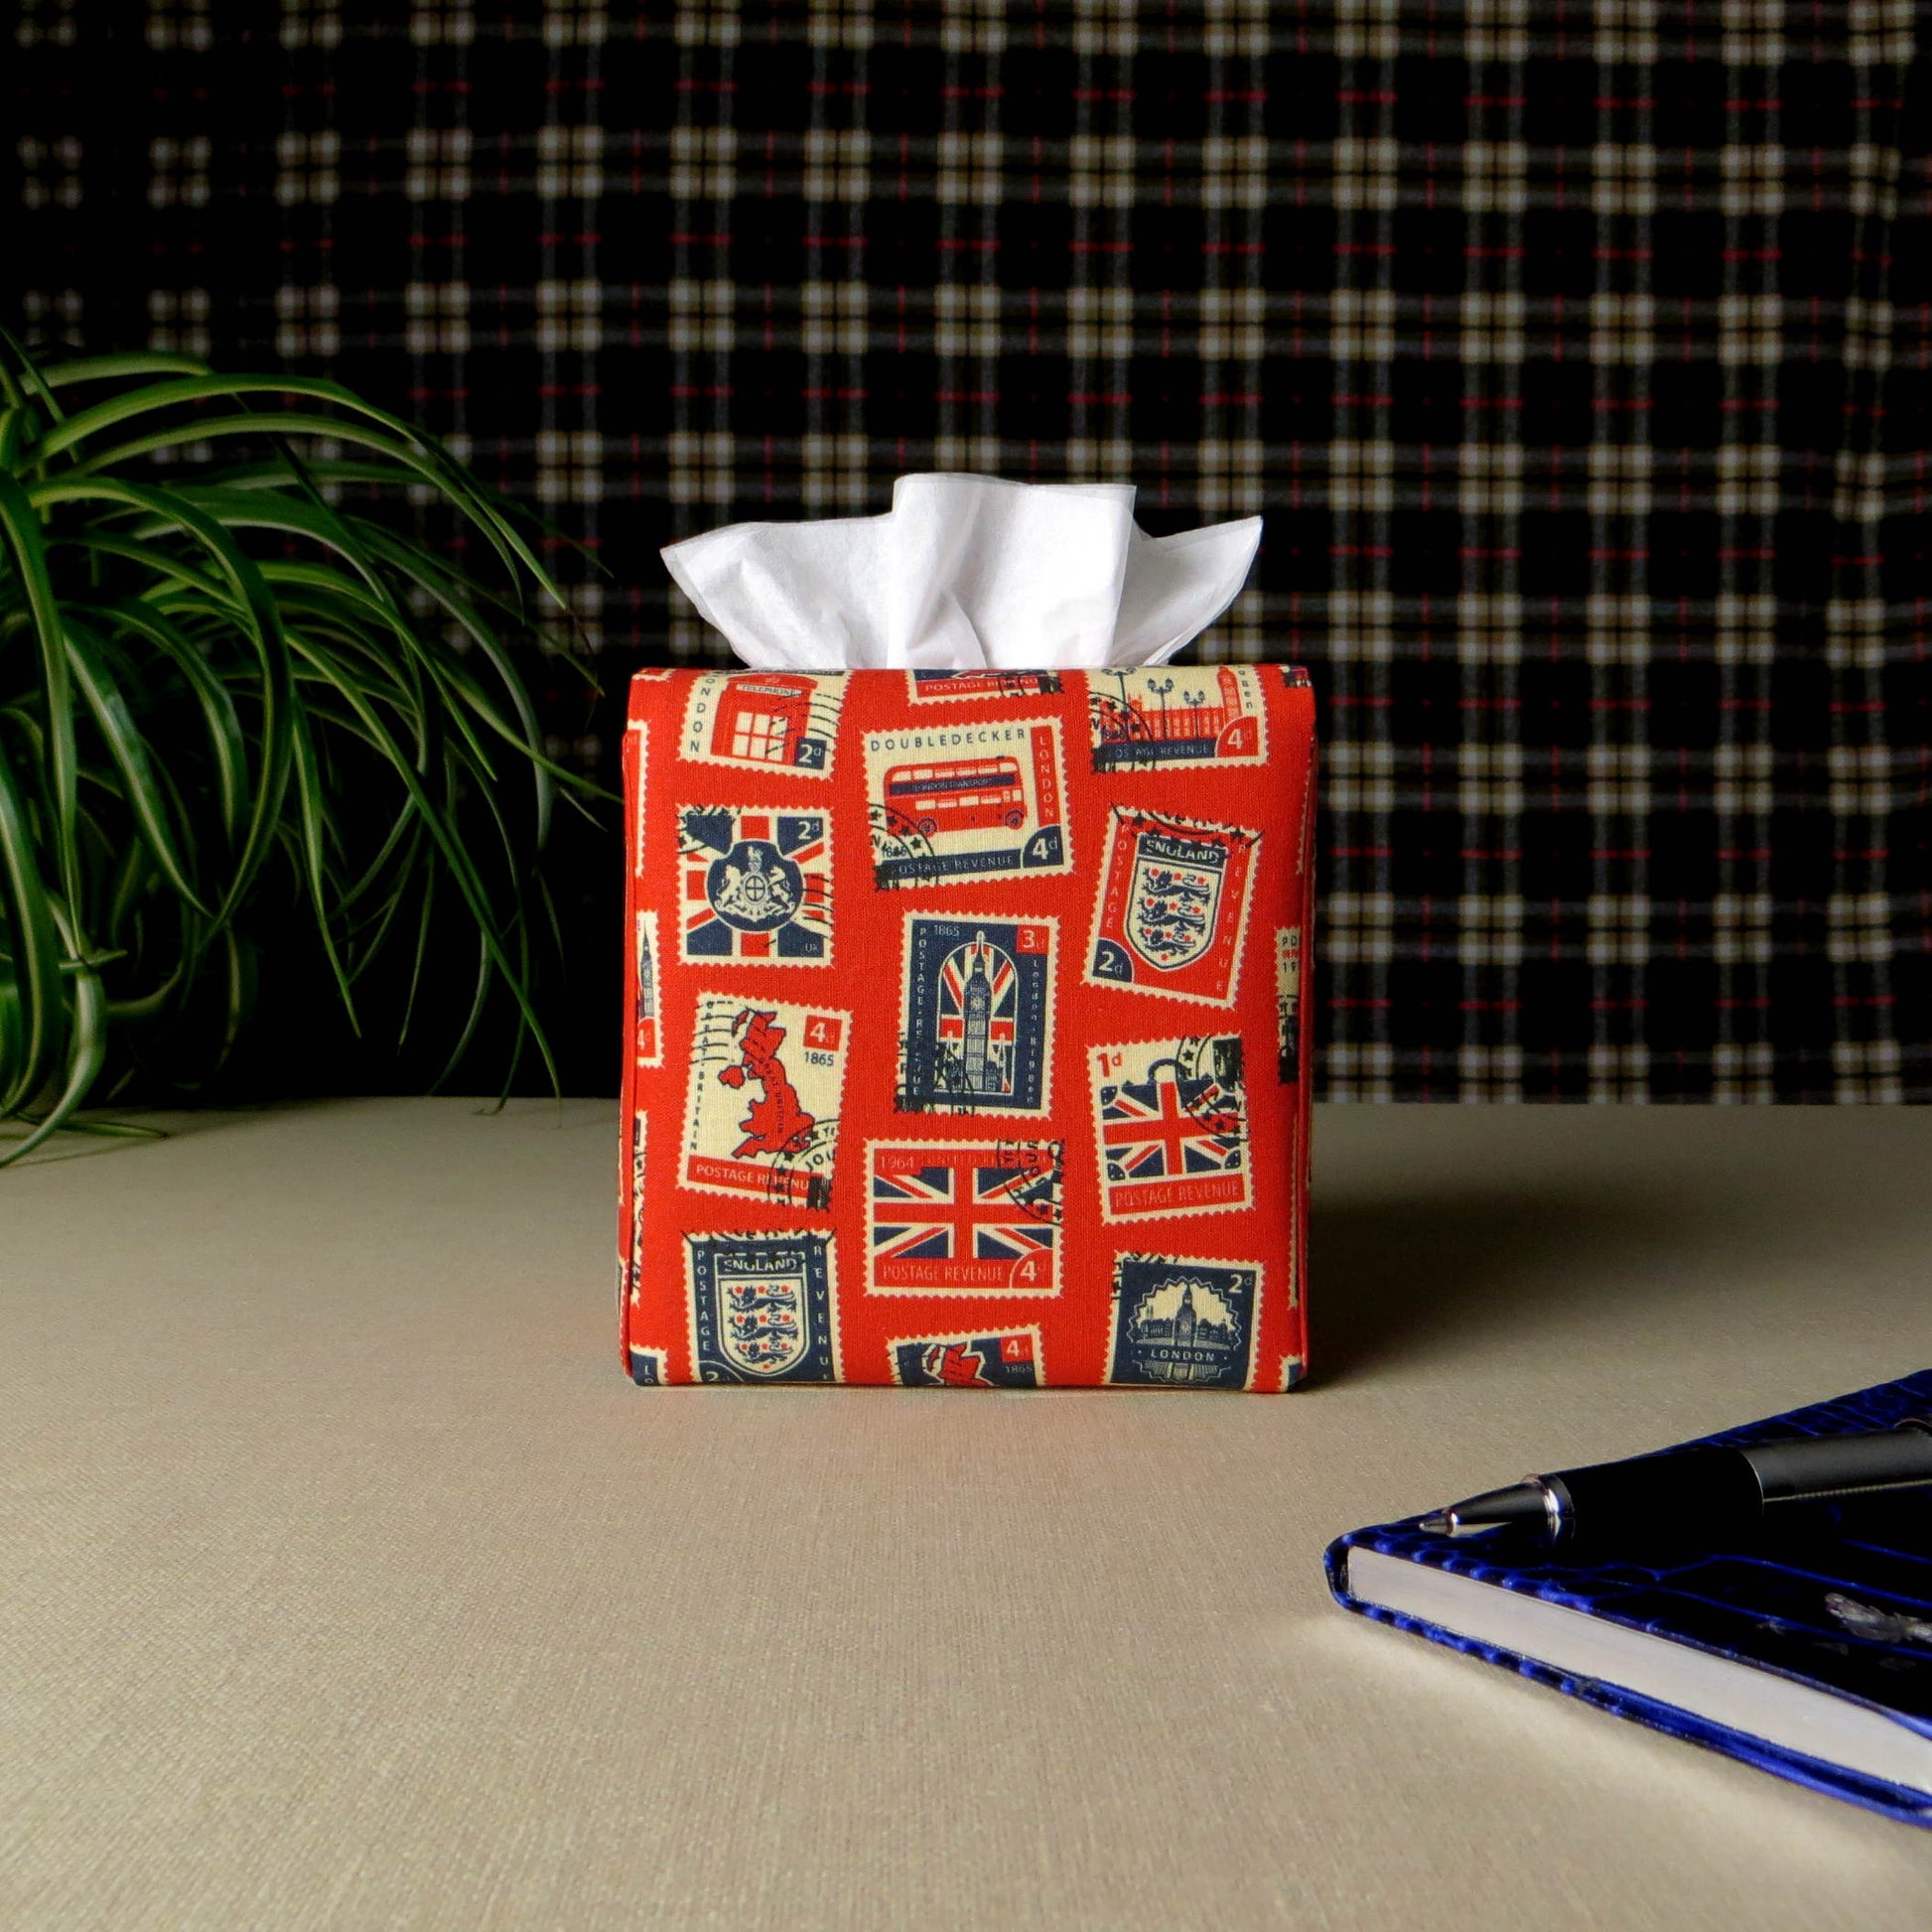 Printed cotton square tissue box cover with British stamps design on red background